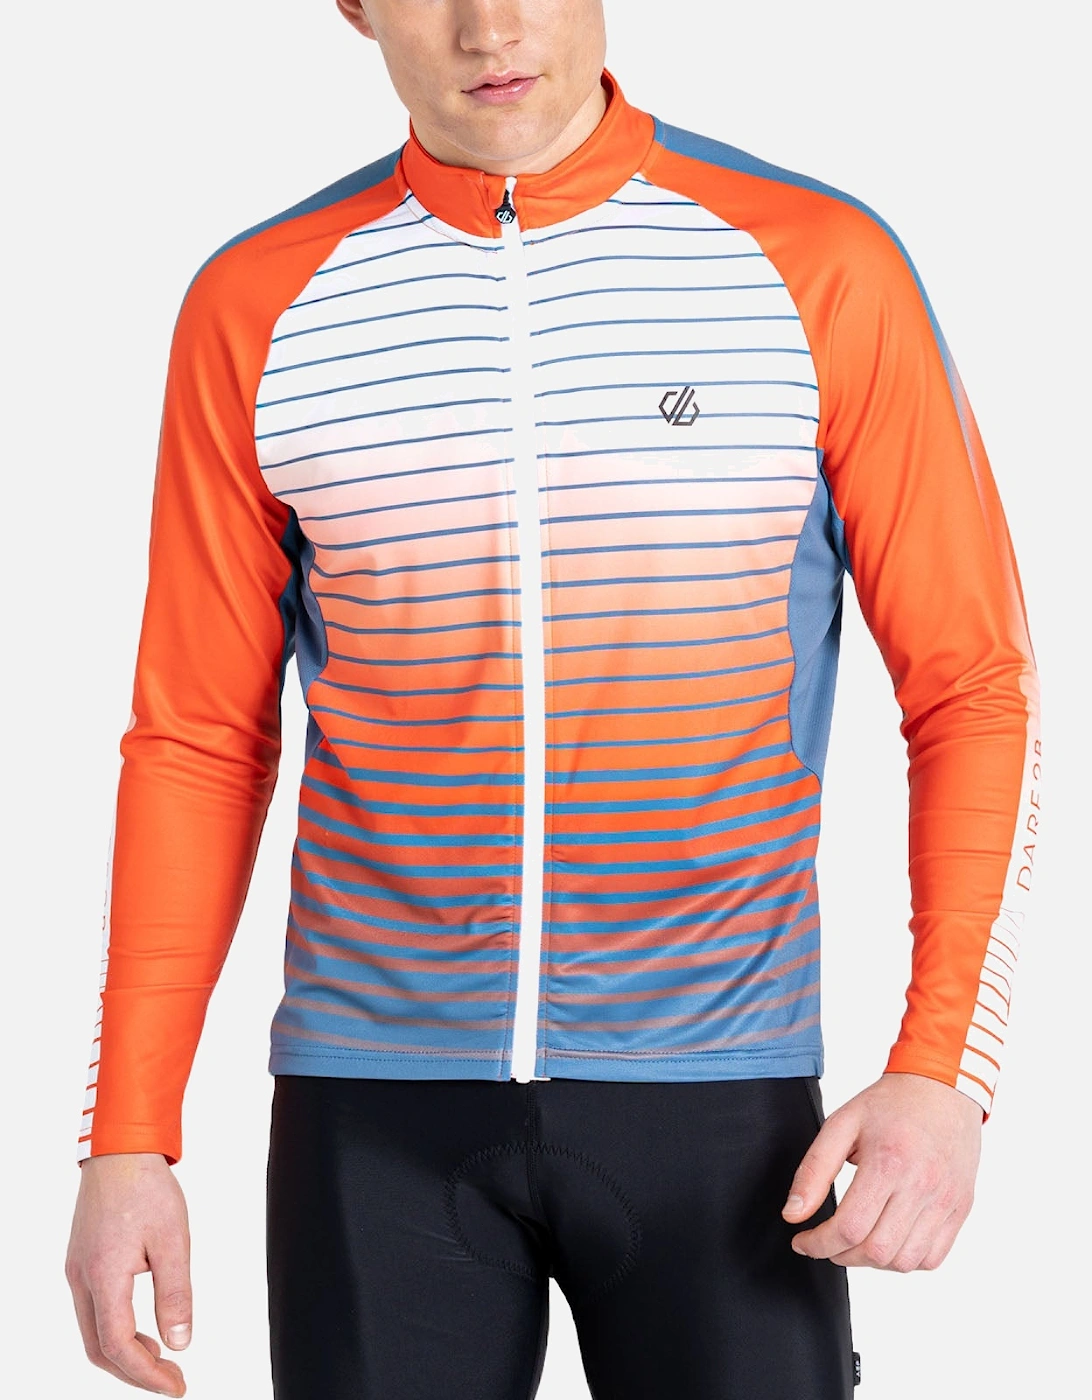 Mens AEP Virtuous Long Sleeve Reflective Cycling Jersey